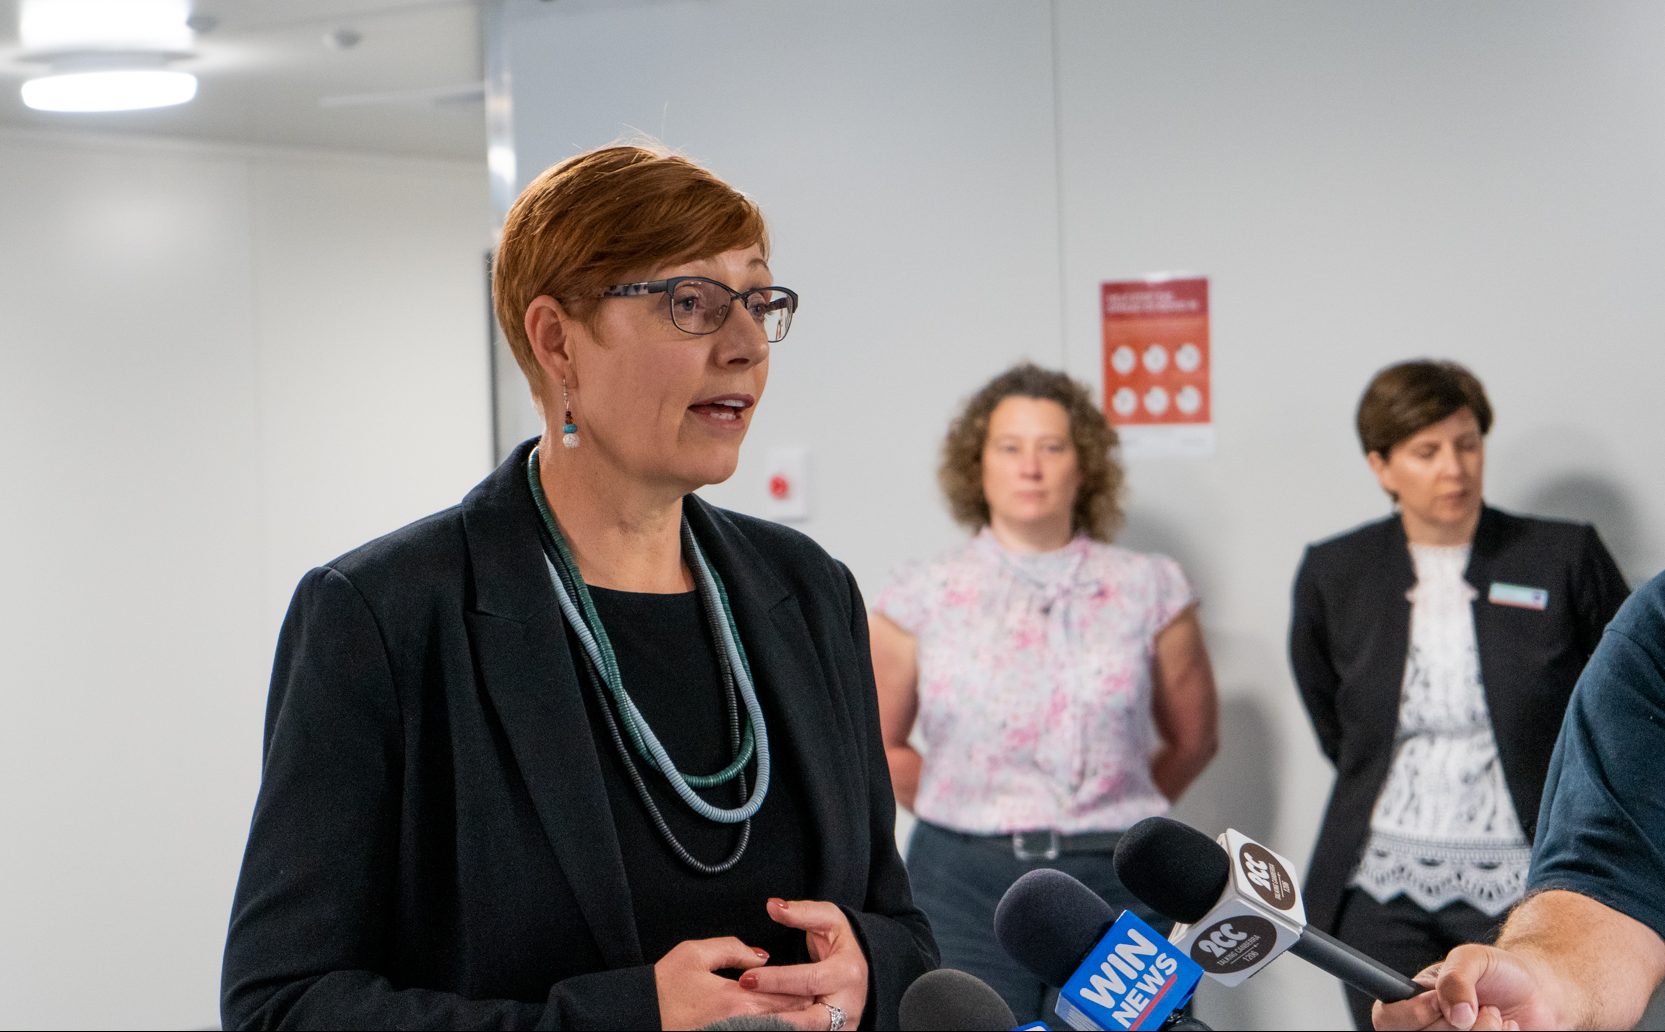 National Cabinet expands vaccine rollout, third vaccination hub flagged for ACT